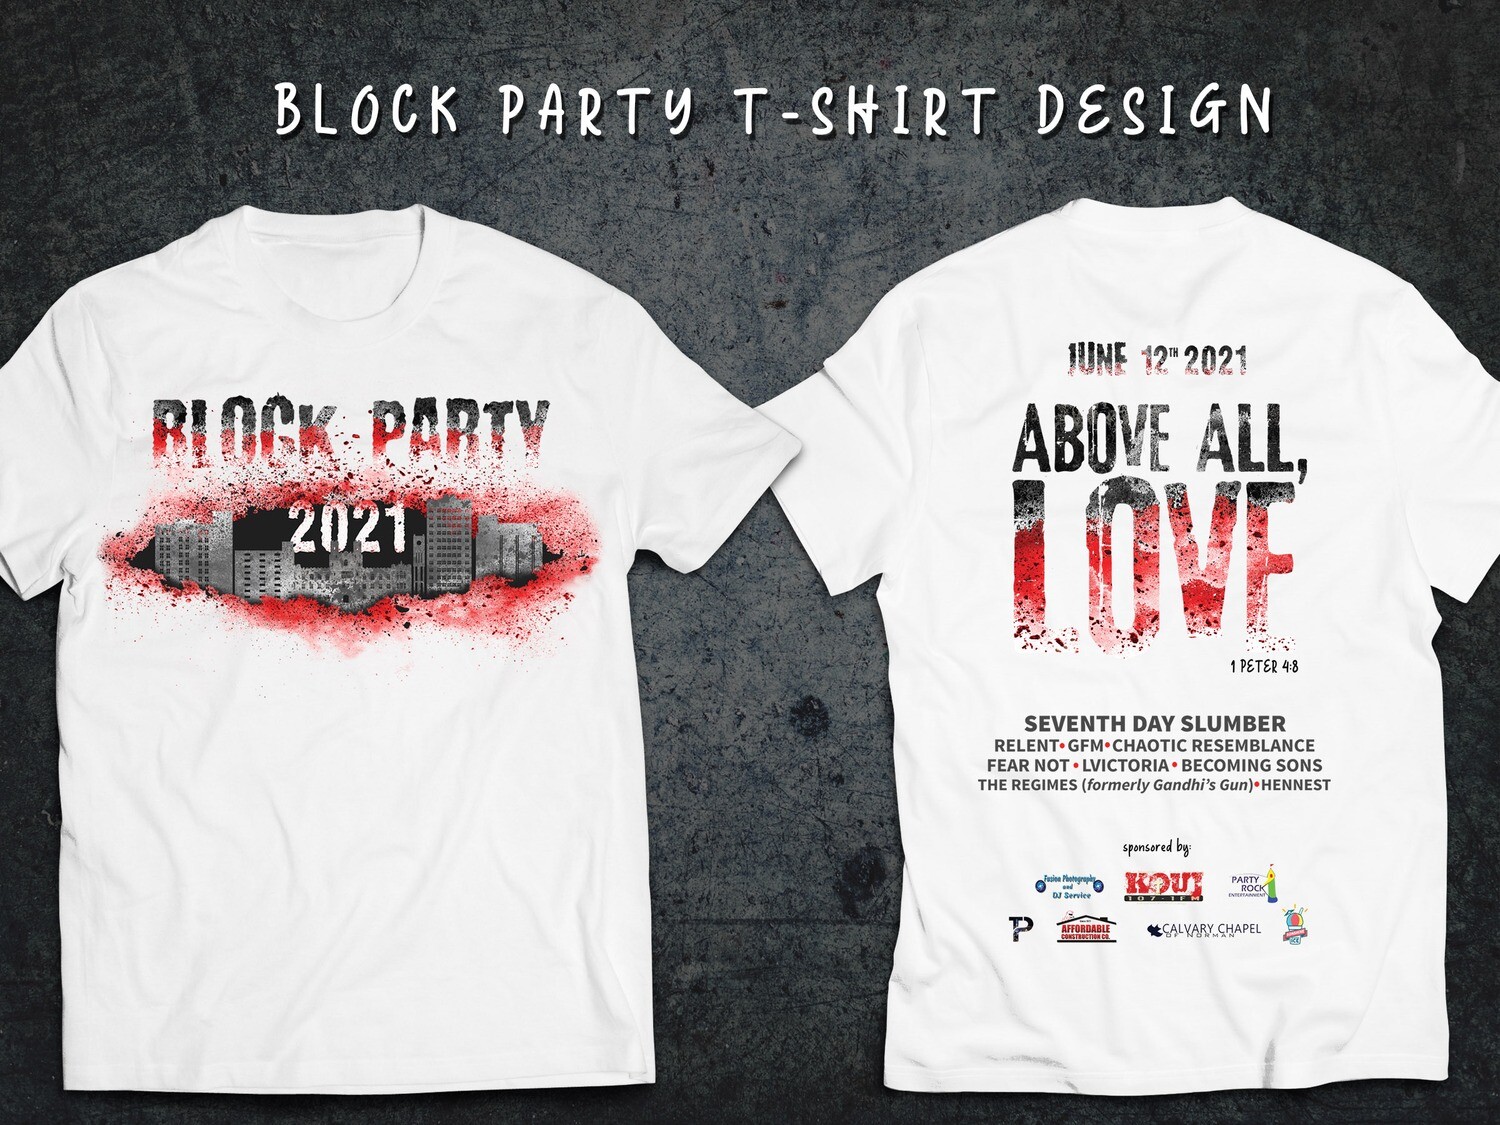 Official Block Party 2021 T-Shirt